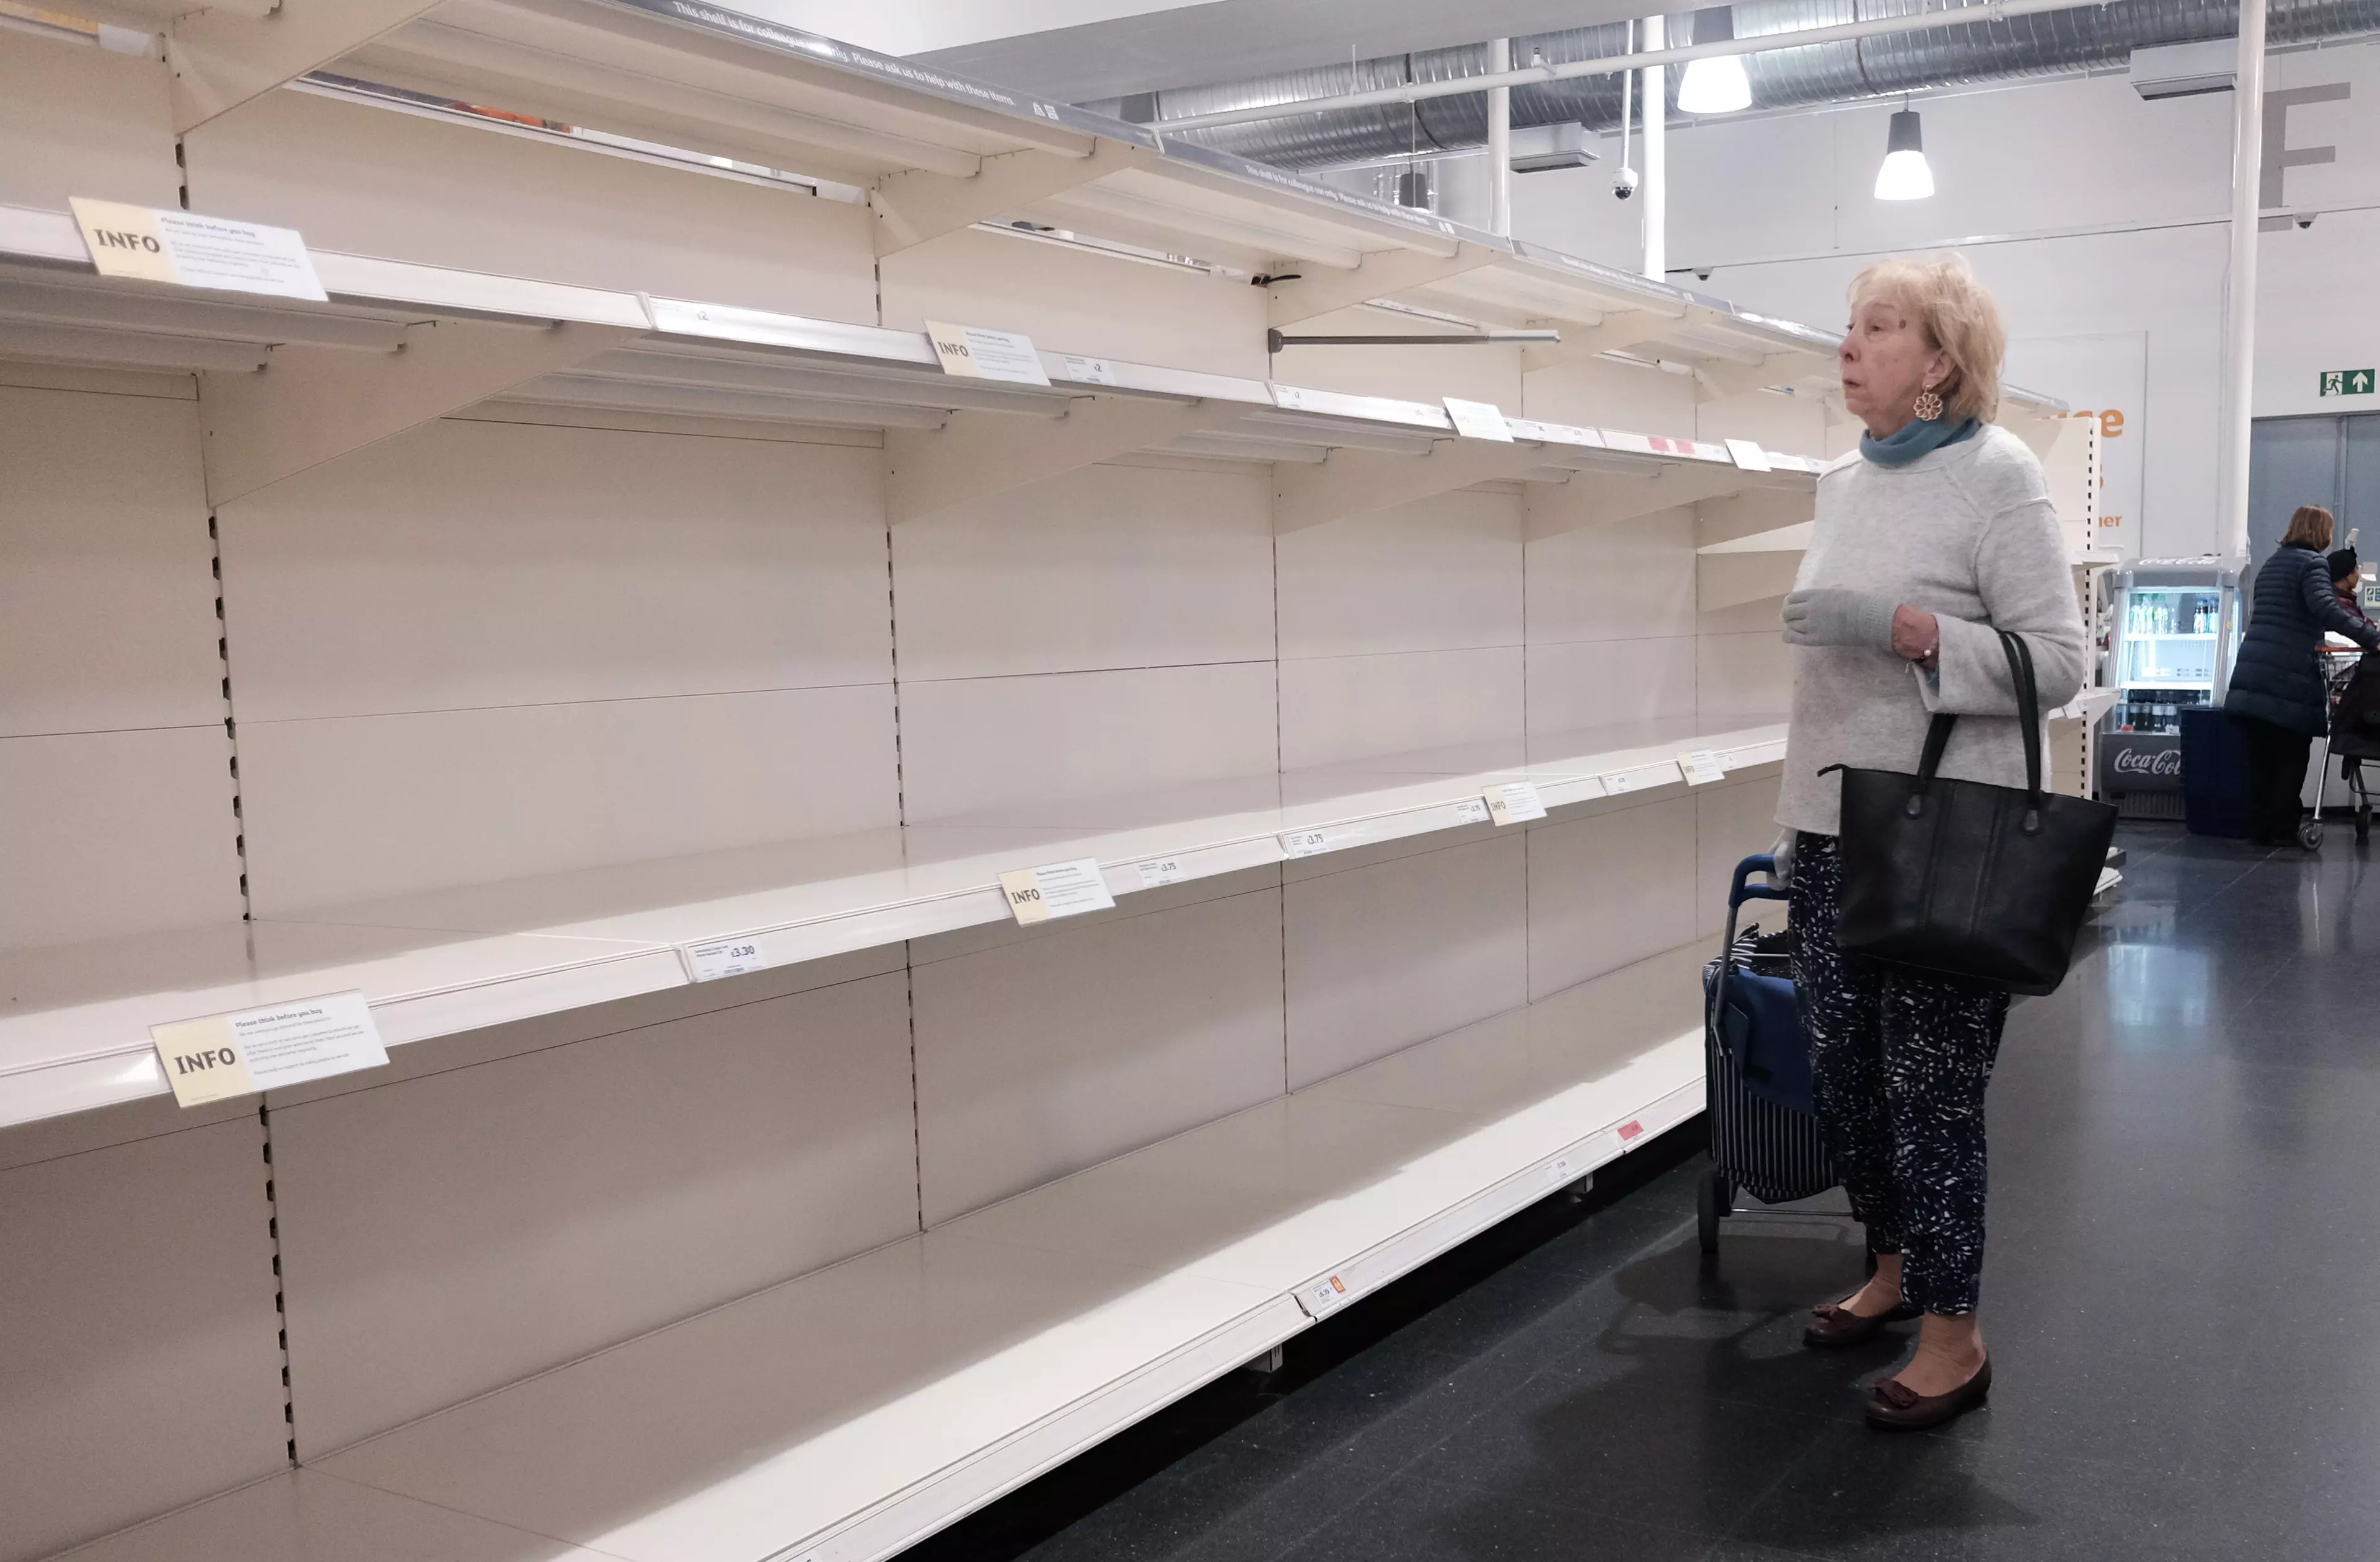 Many UK supermarkets are being stripped bare (